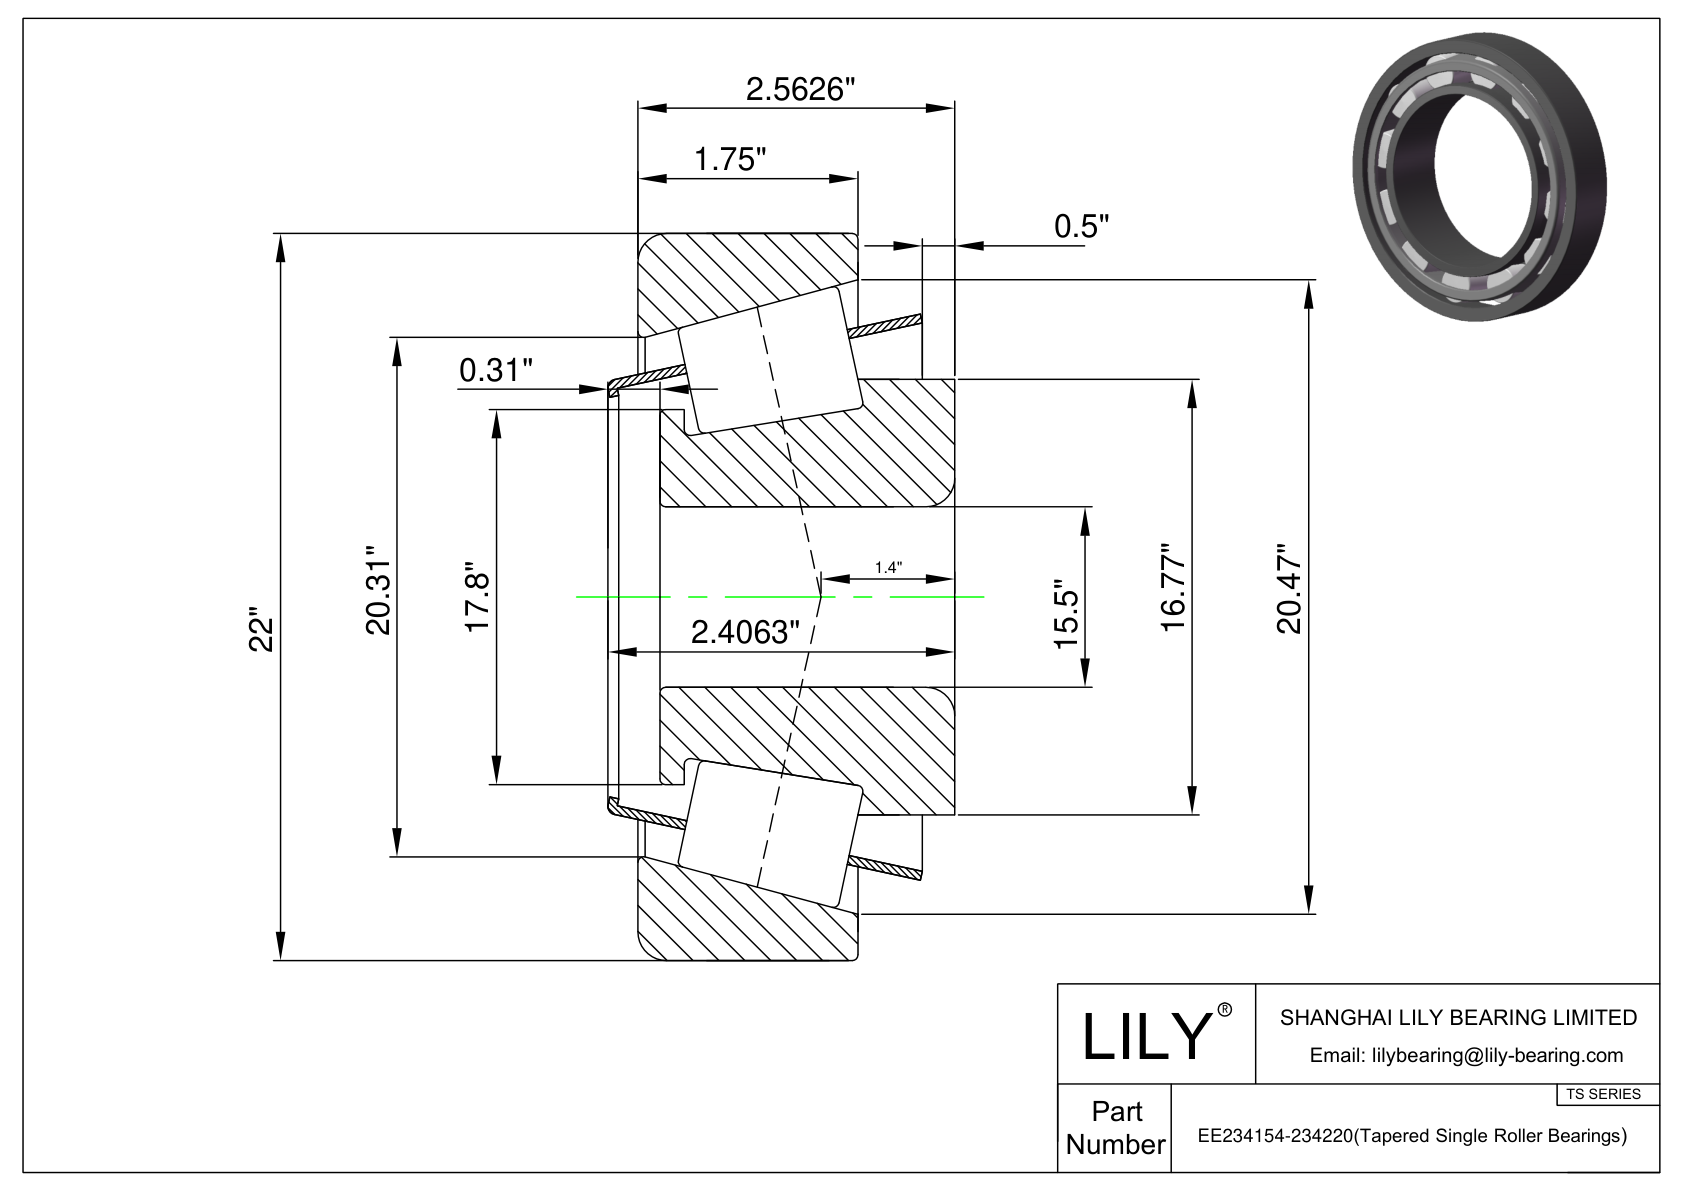 EE234154-234220 TS (Tapered Single Roller Bearings) (Imperial) cad drawing